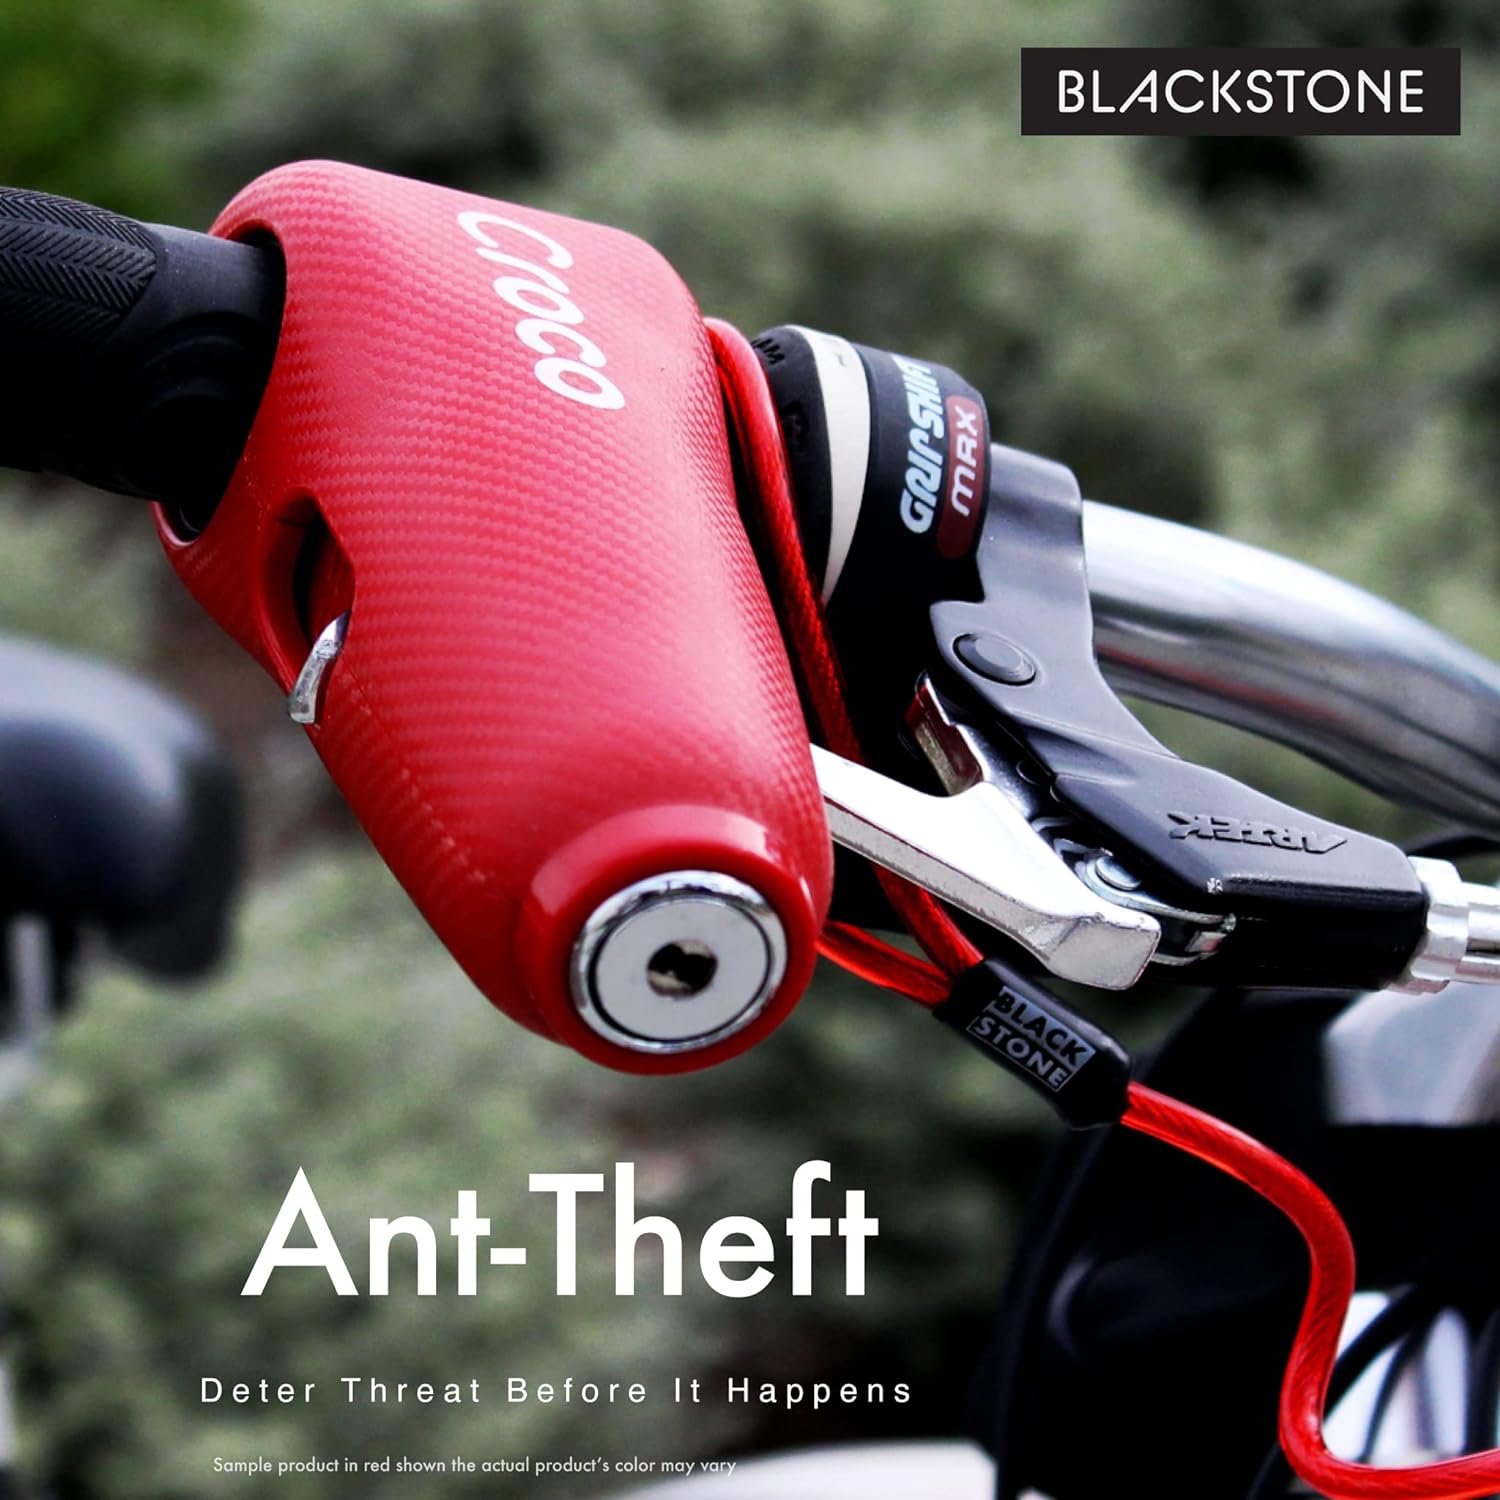 The image features a red Croco alarm lock attached to a bike's brake lever, suggesting its use as a theft deterrent. The product is part of the Blackstone brand, and the image emphasizes the anti-theft aspect of the device with the text "Deter Threat Before It Happens." A disclaimer notes that while the sample product is shown in red, the actual product's color may vary. The setting appears to be outdoors, possibly highlighting the lock's practical use in real-life scenarios